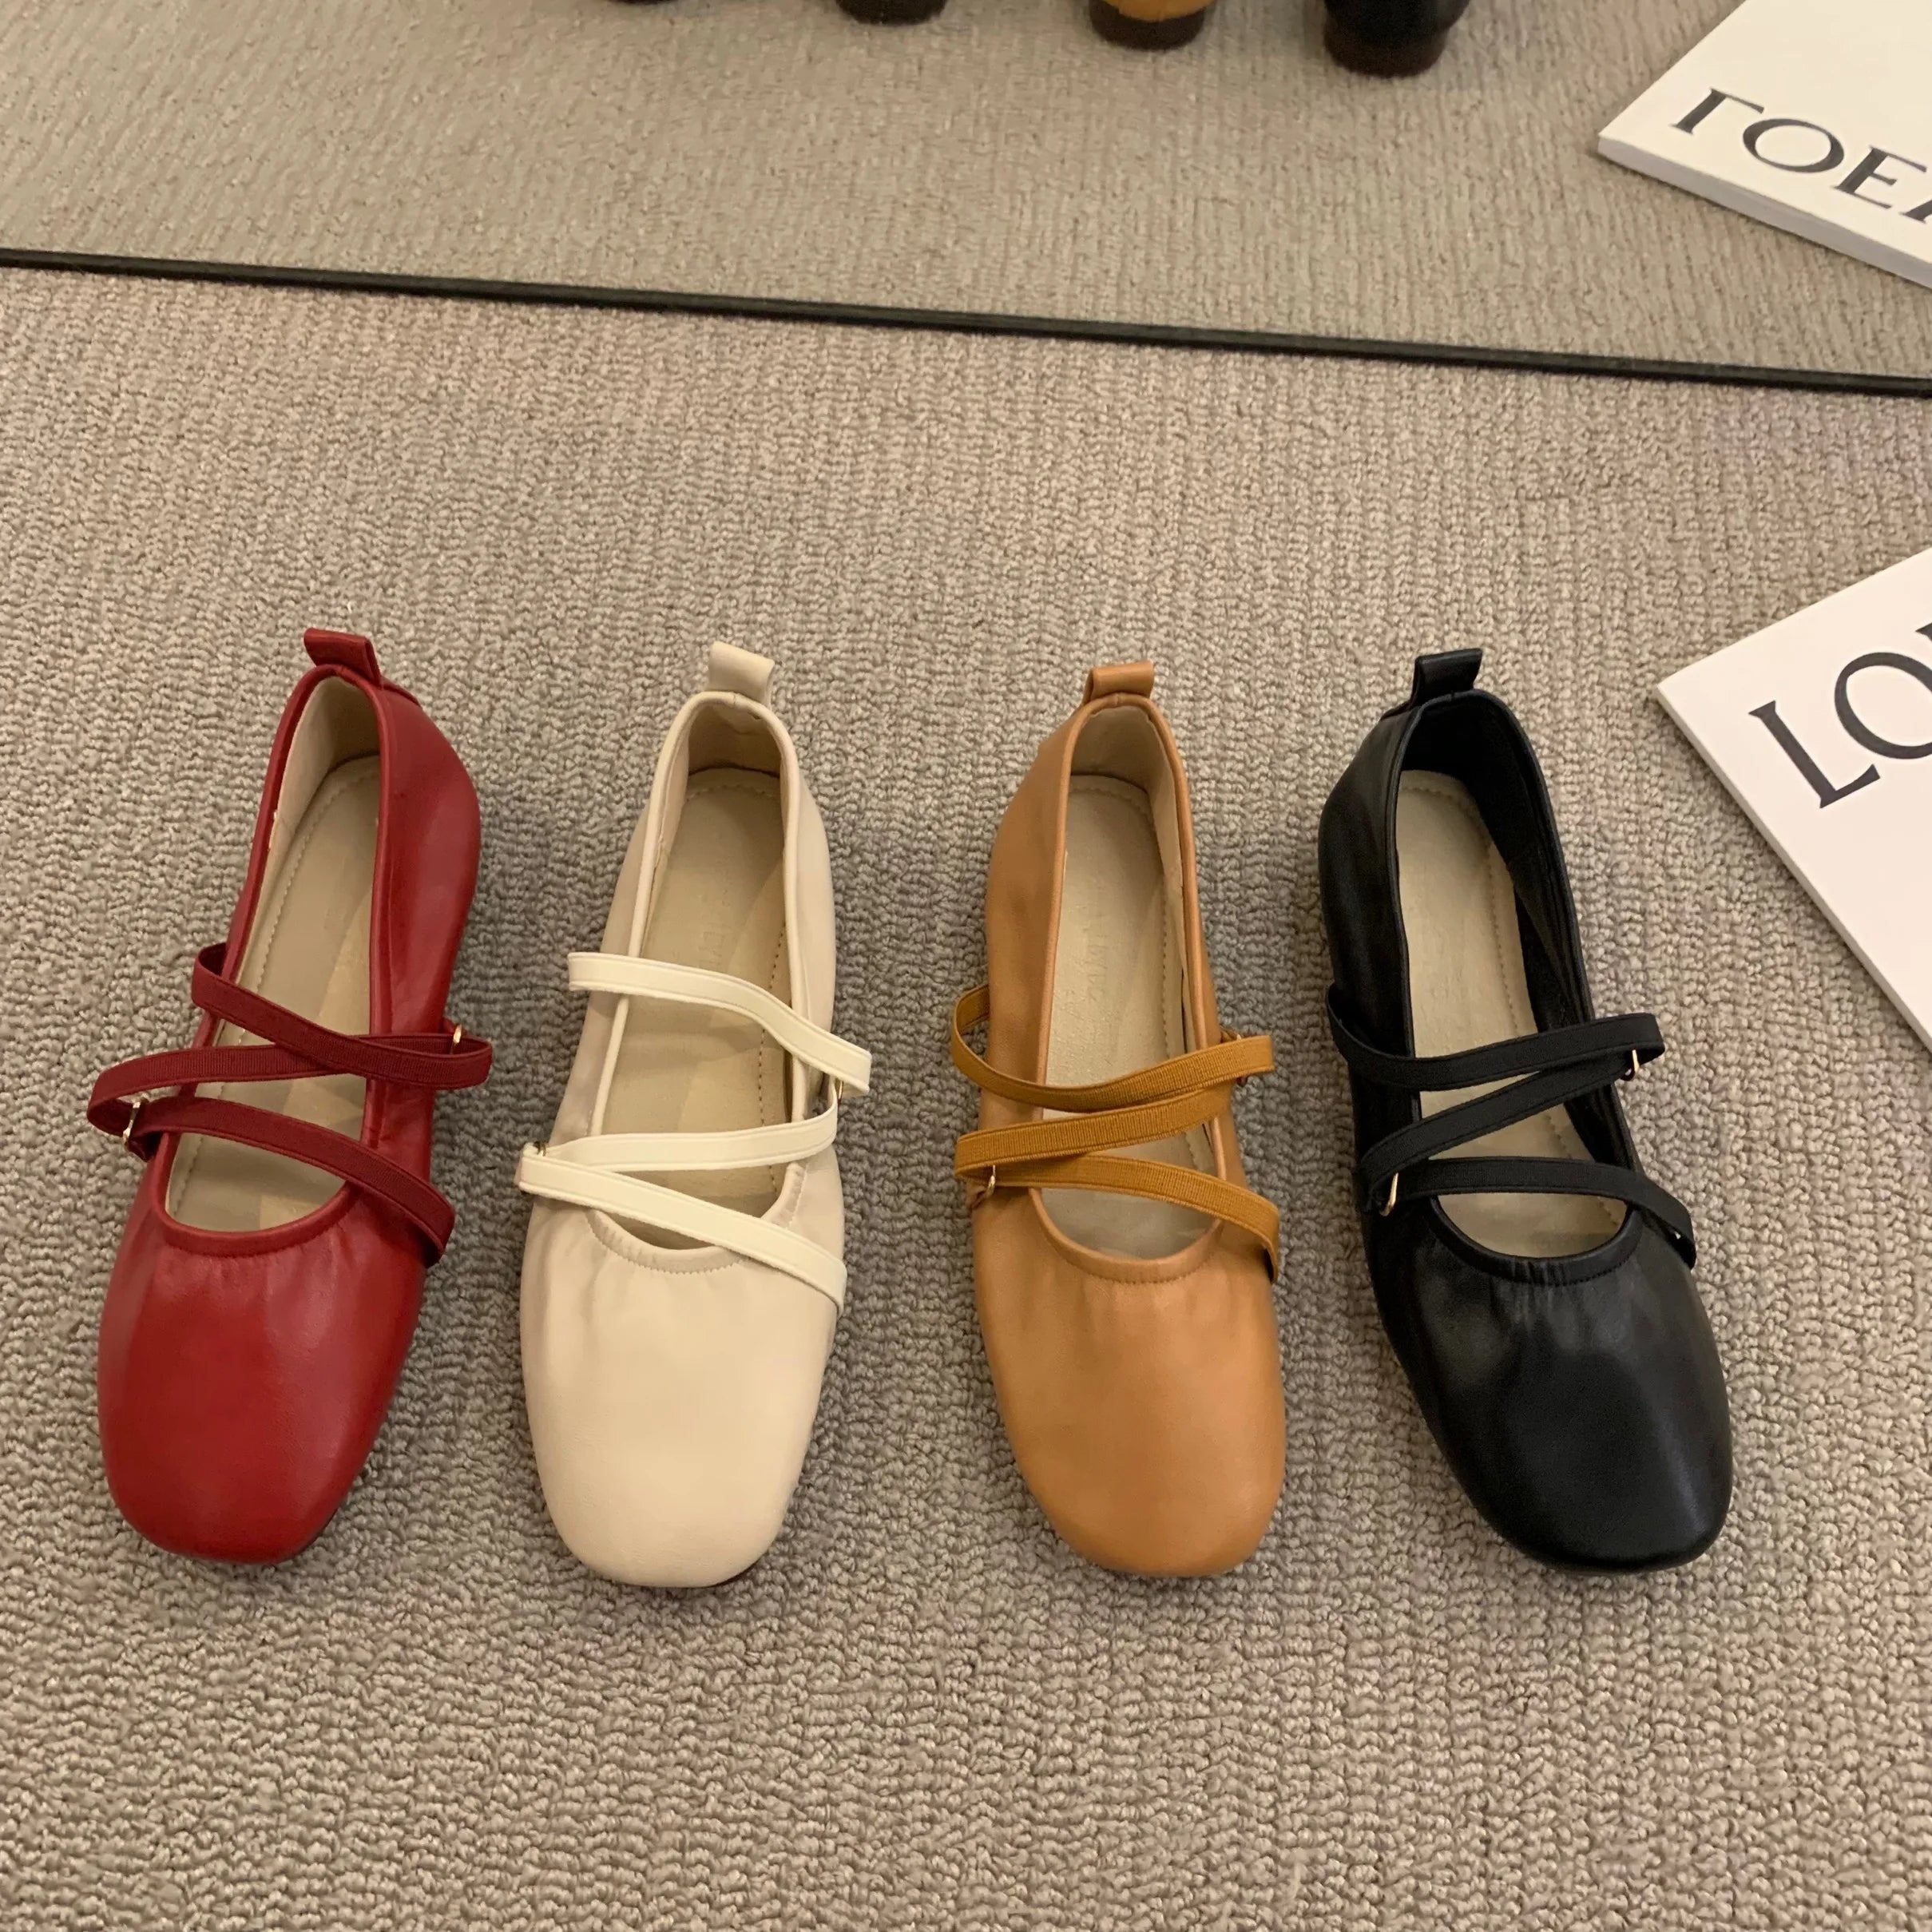 Bailamos Women Shoes 2021 Brand Designer Mary Janes Shoes Woman Square Toe Japanned Leather Flats Vintage Narrow Band Loafers